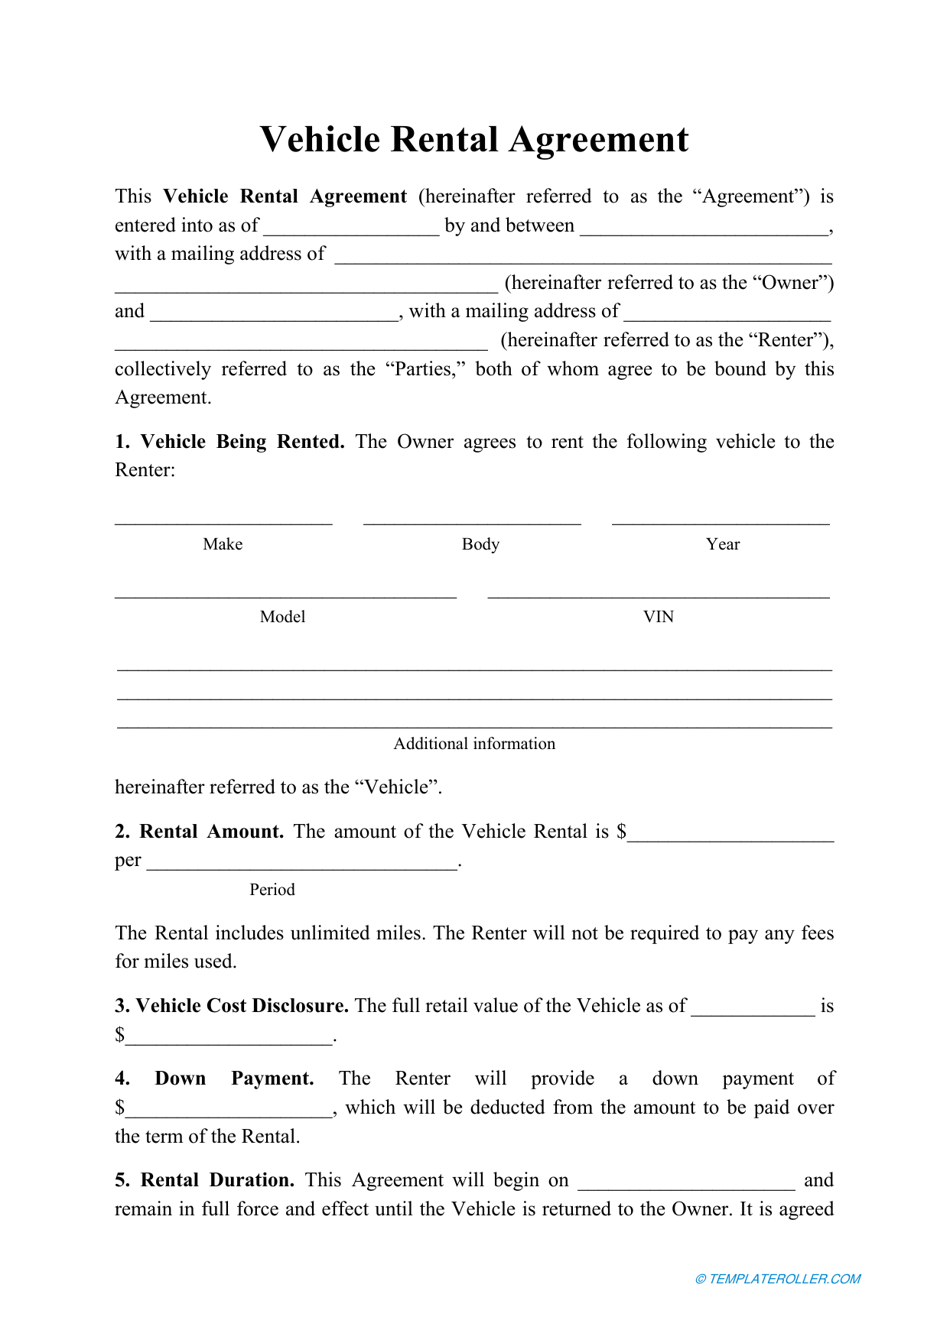 Vehicle Rental Agreement Template Download Printable PDF With lease of vehicle agreement template